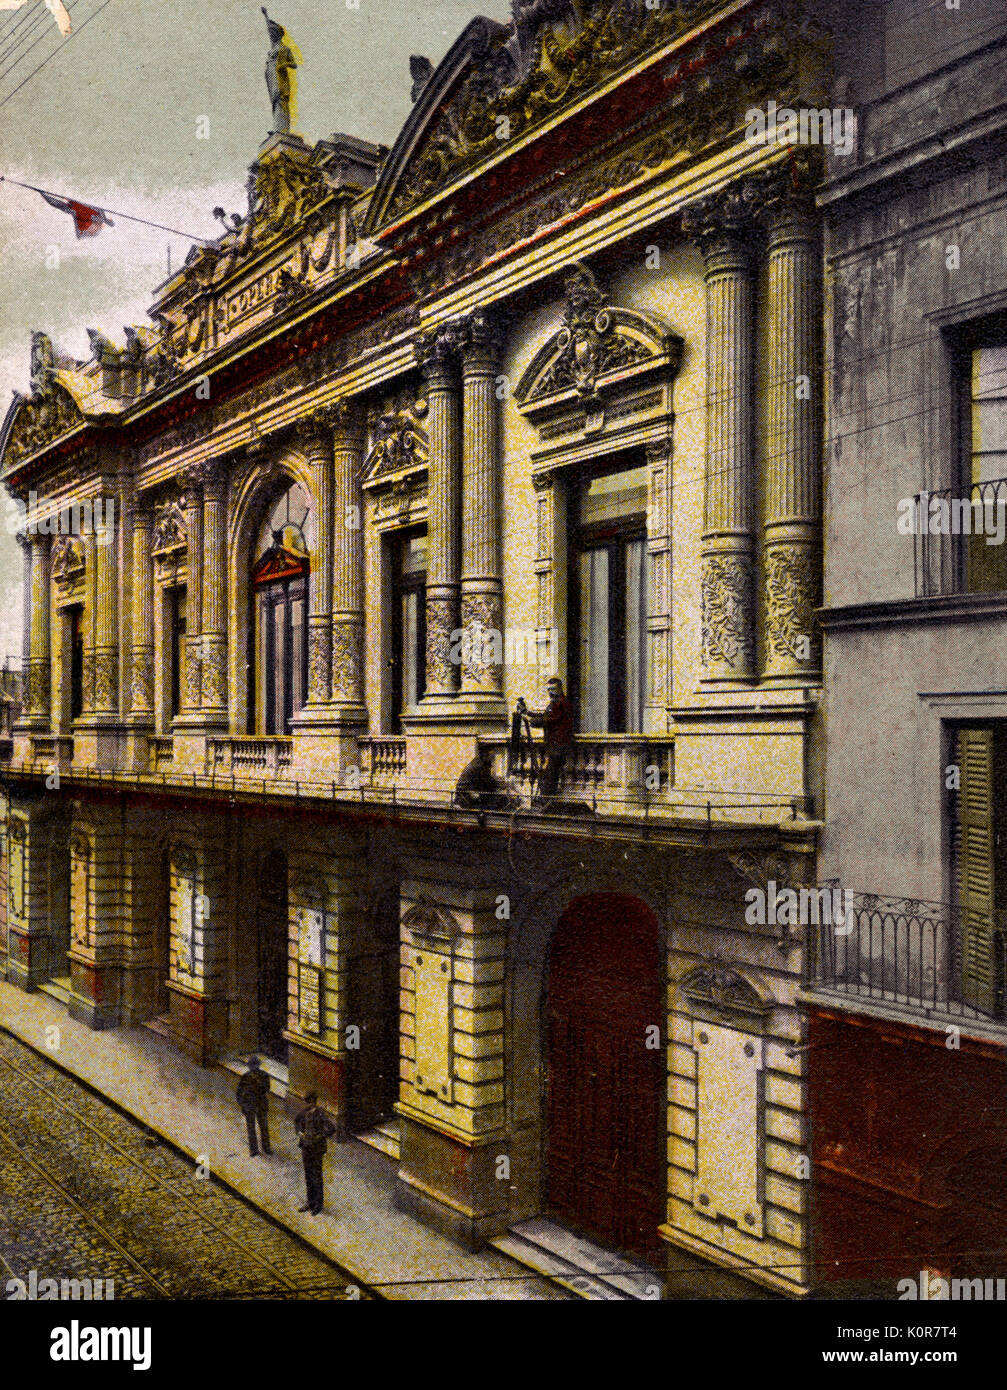 Teatro Colon opera house in Buenos Aires. Early 1900s Stock Photo